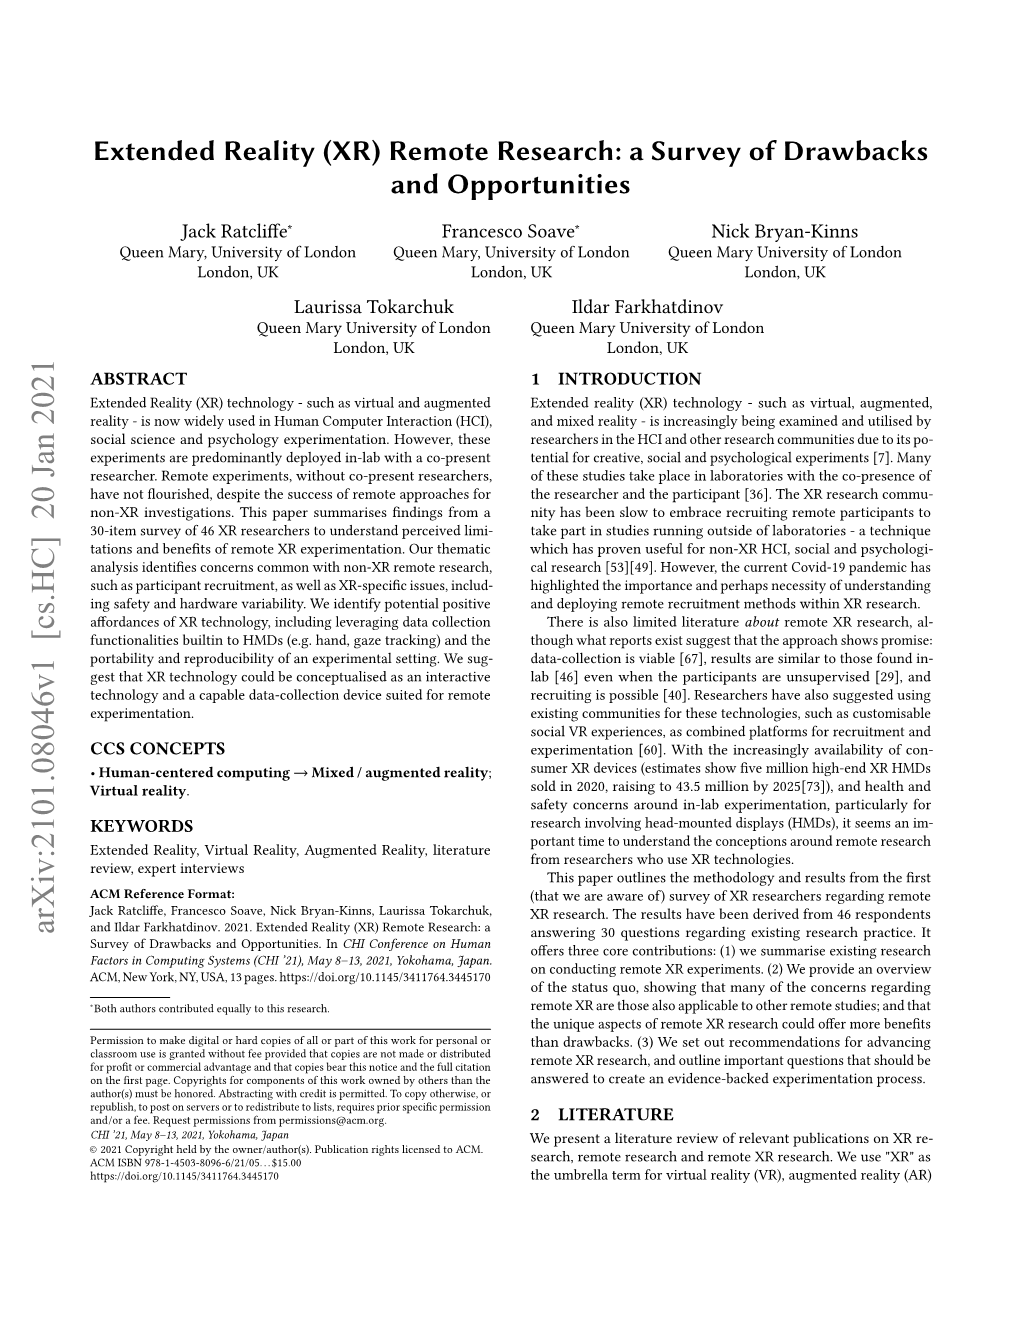 Extended Reality (XR) Remote Research: a Survey of Drawbacks and Opportunities